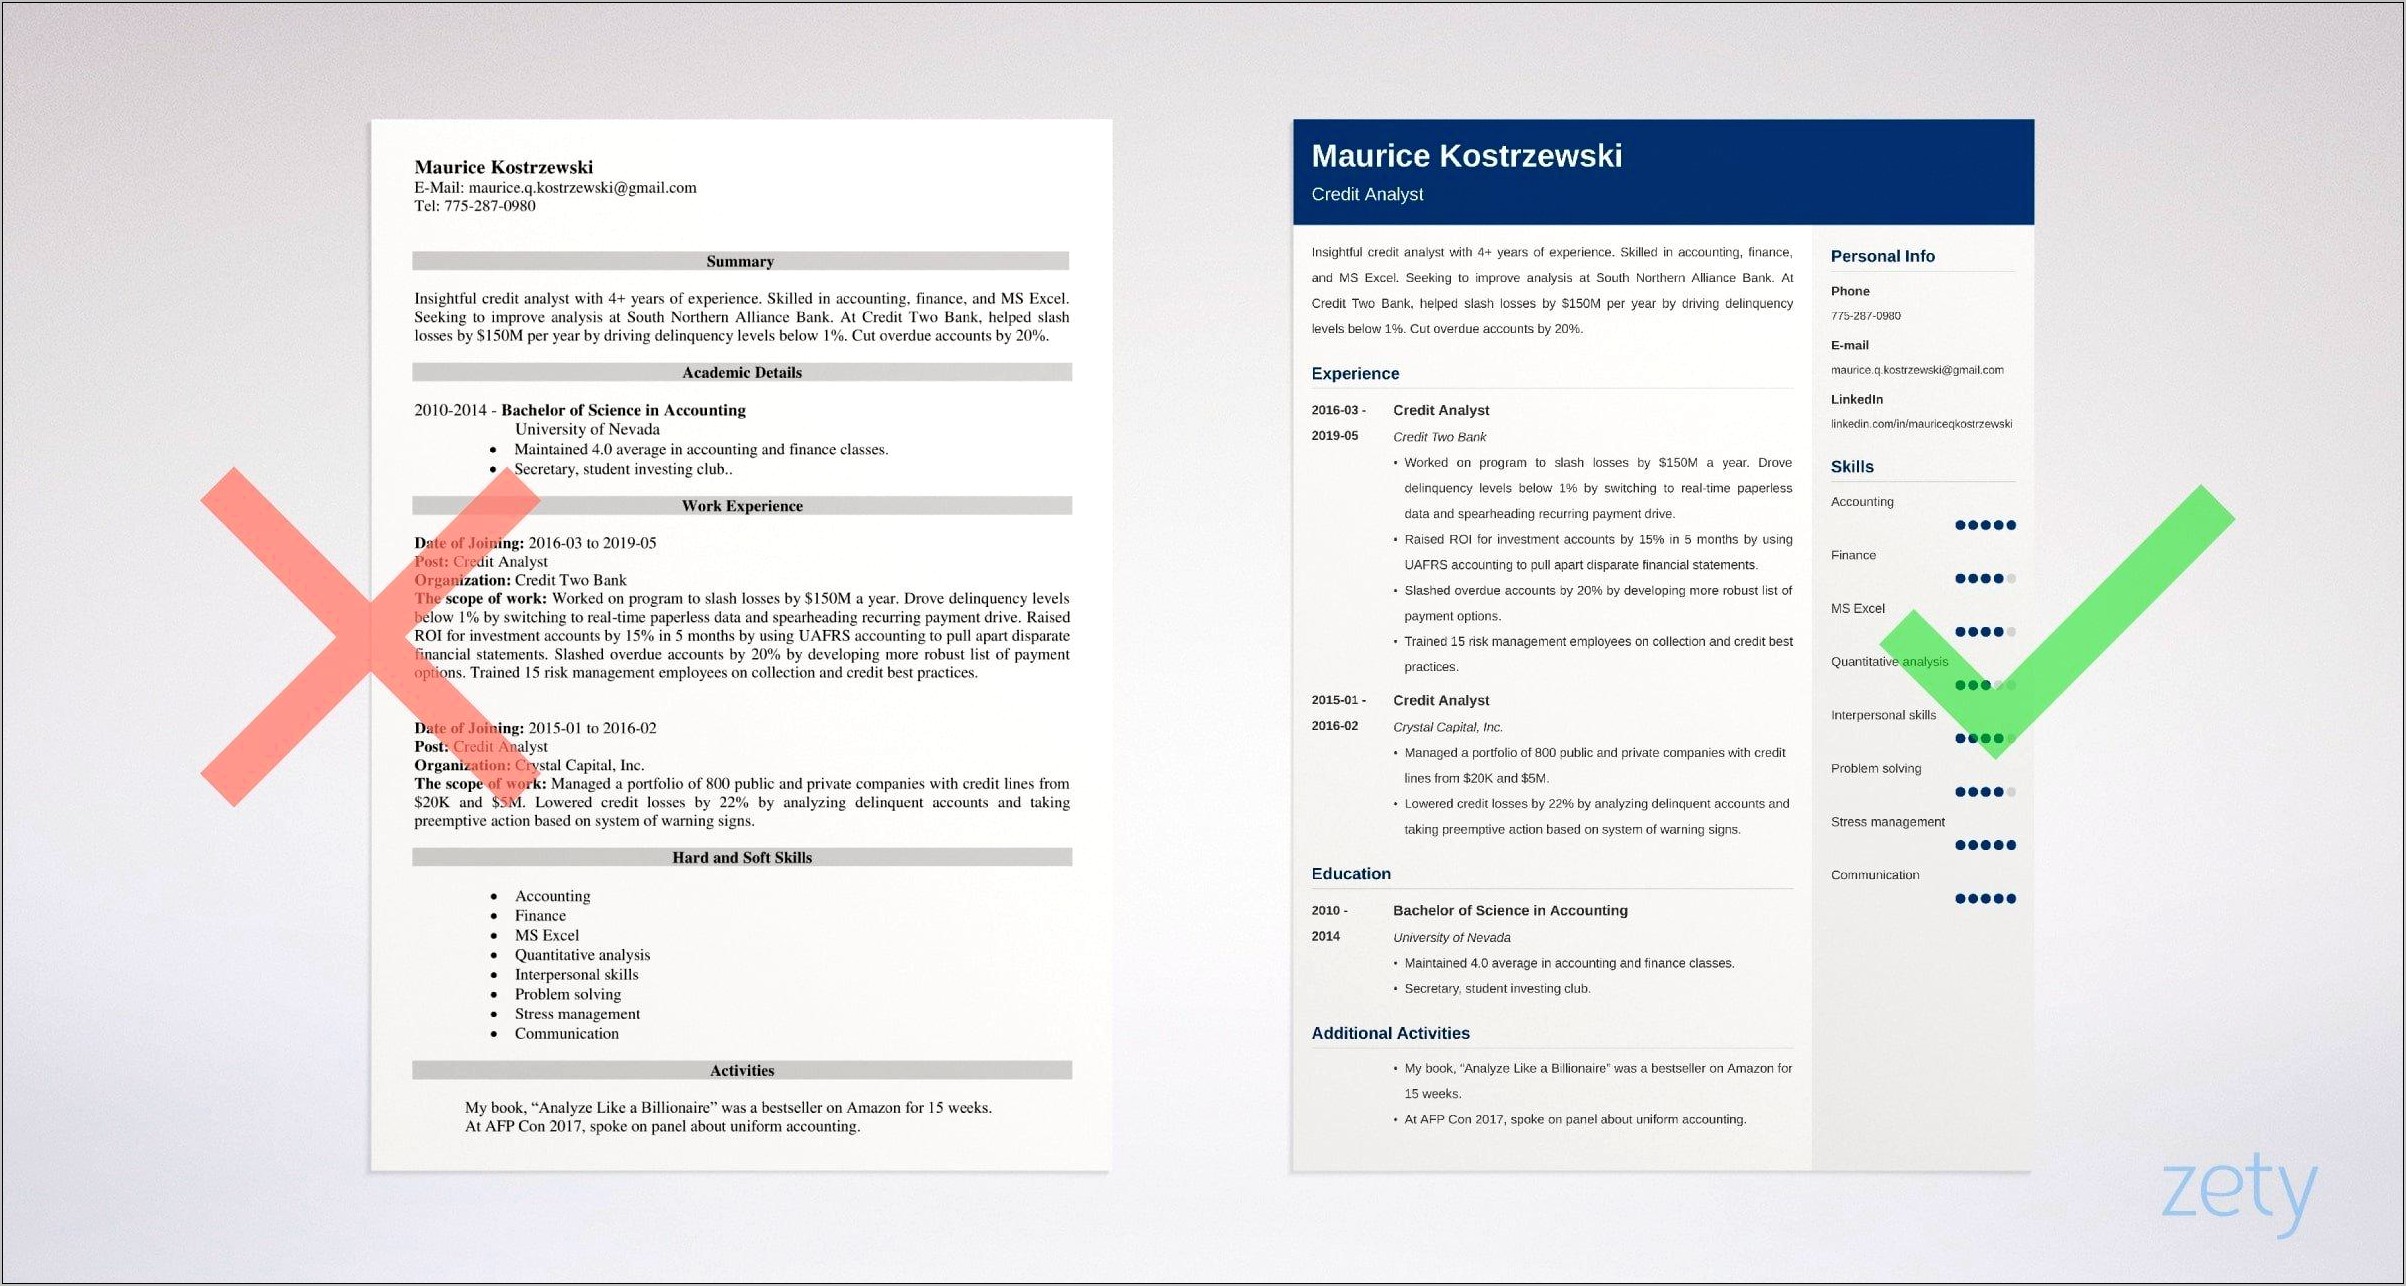 Example Resume Of Wealth Management Associate